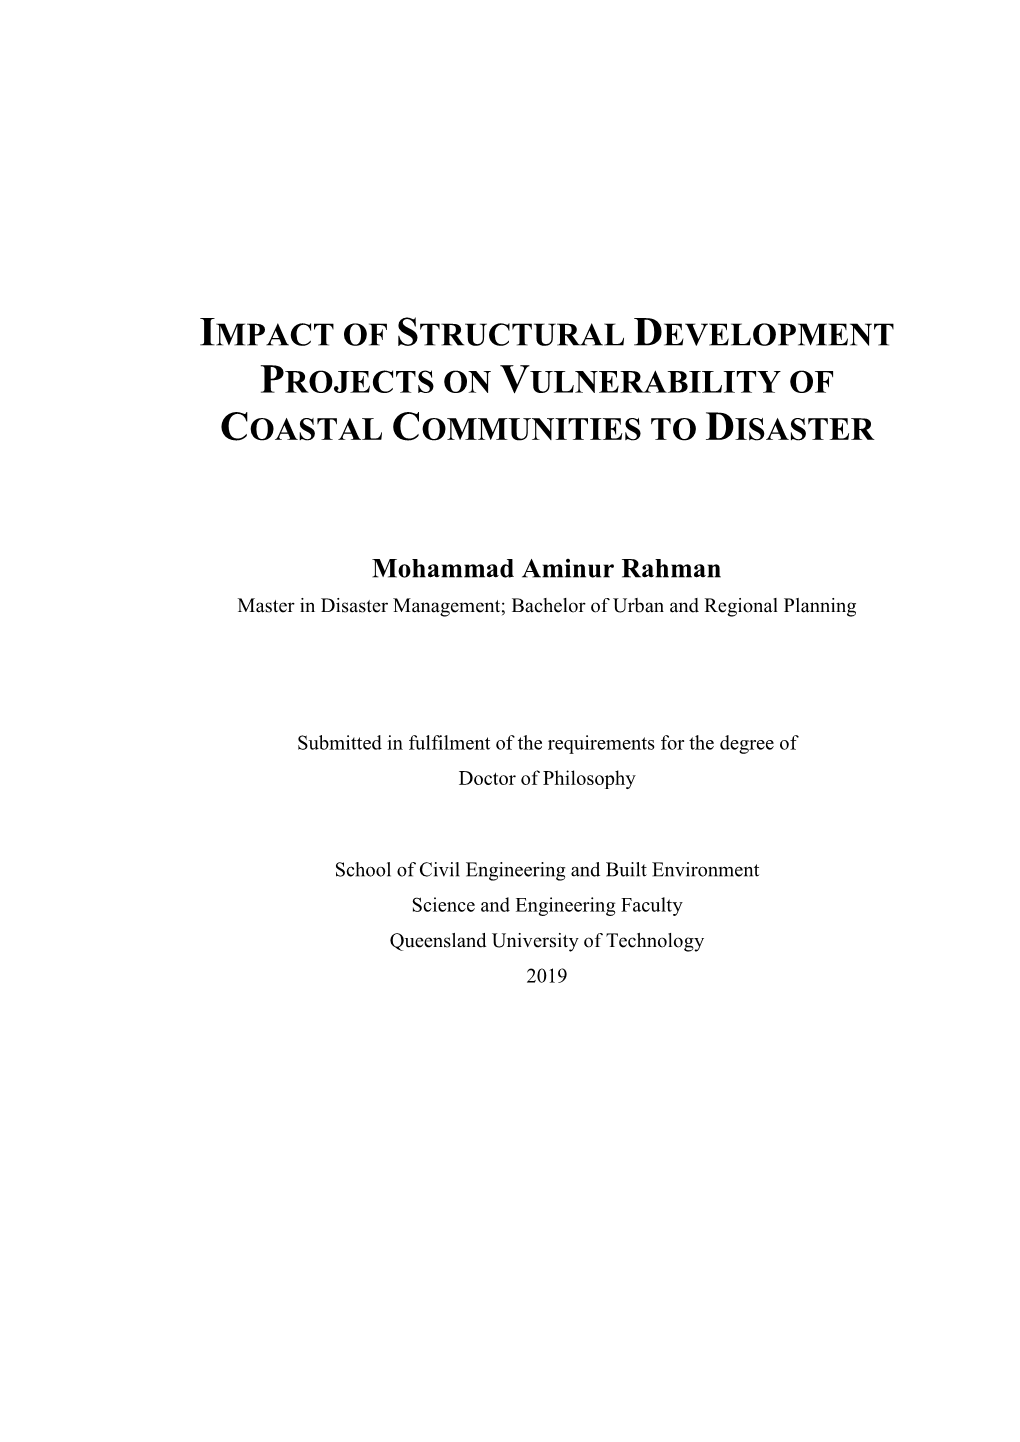 Impact of Structural Development Projects on Vulnerability of Coastal Communities to Disaster